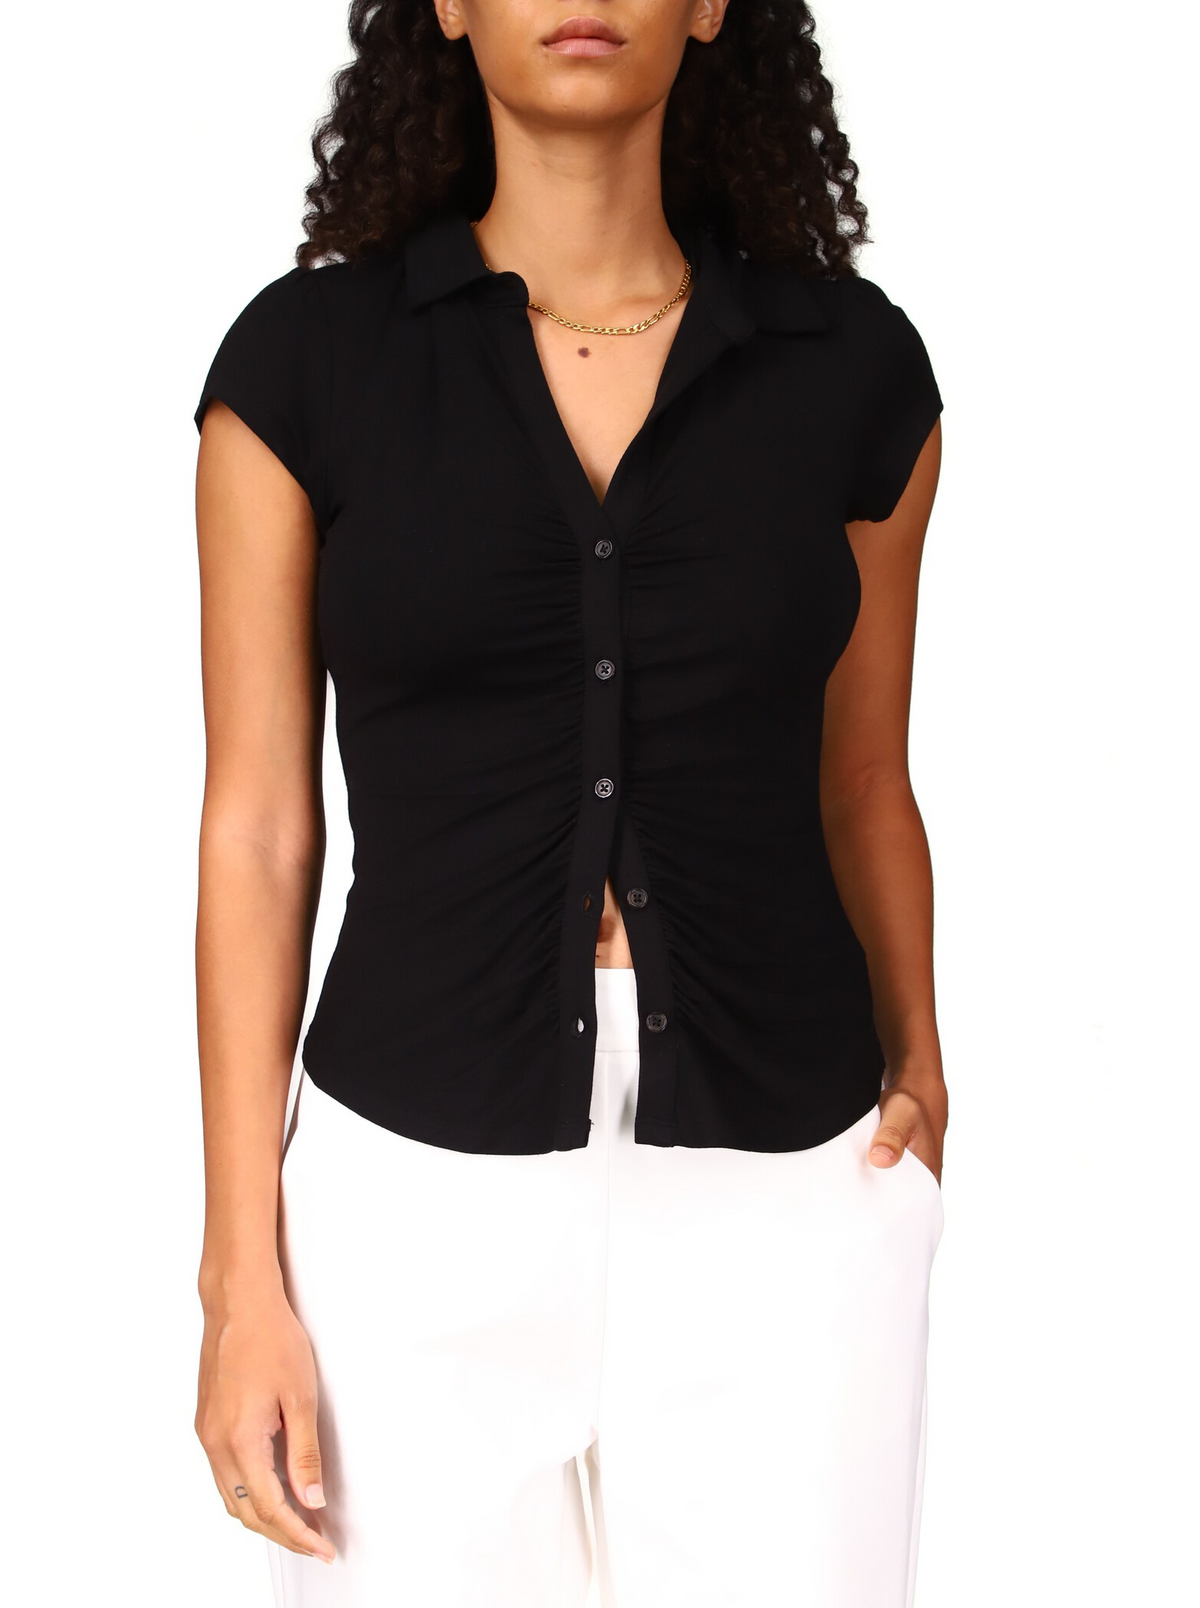 Sanctuary Dream Button Up Top in Black - Size L Available